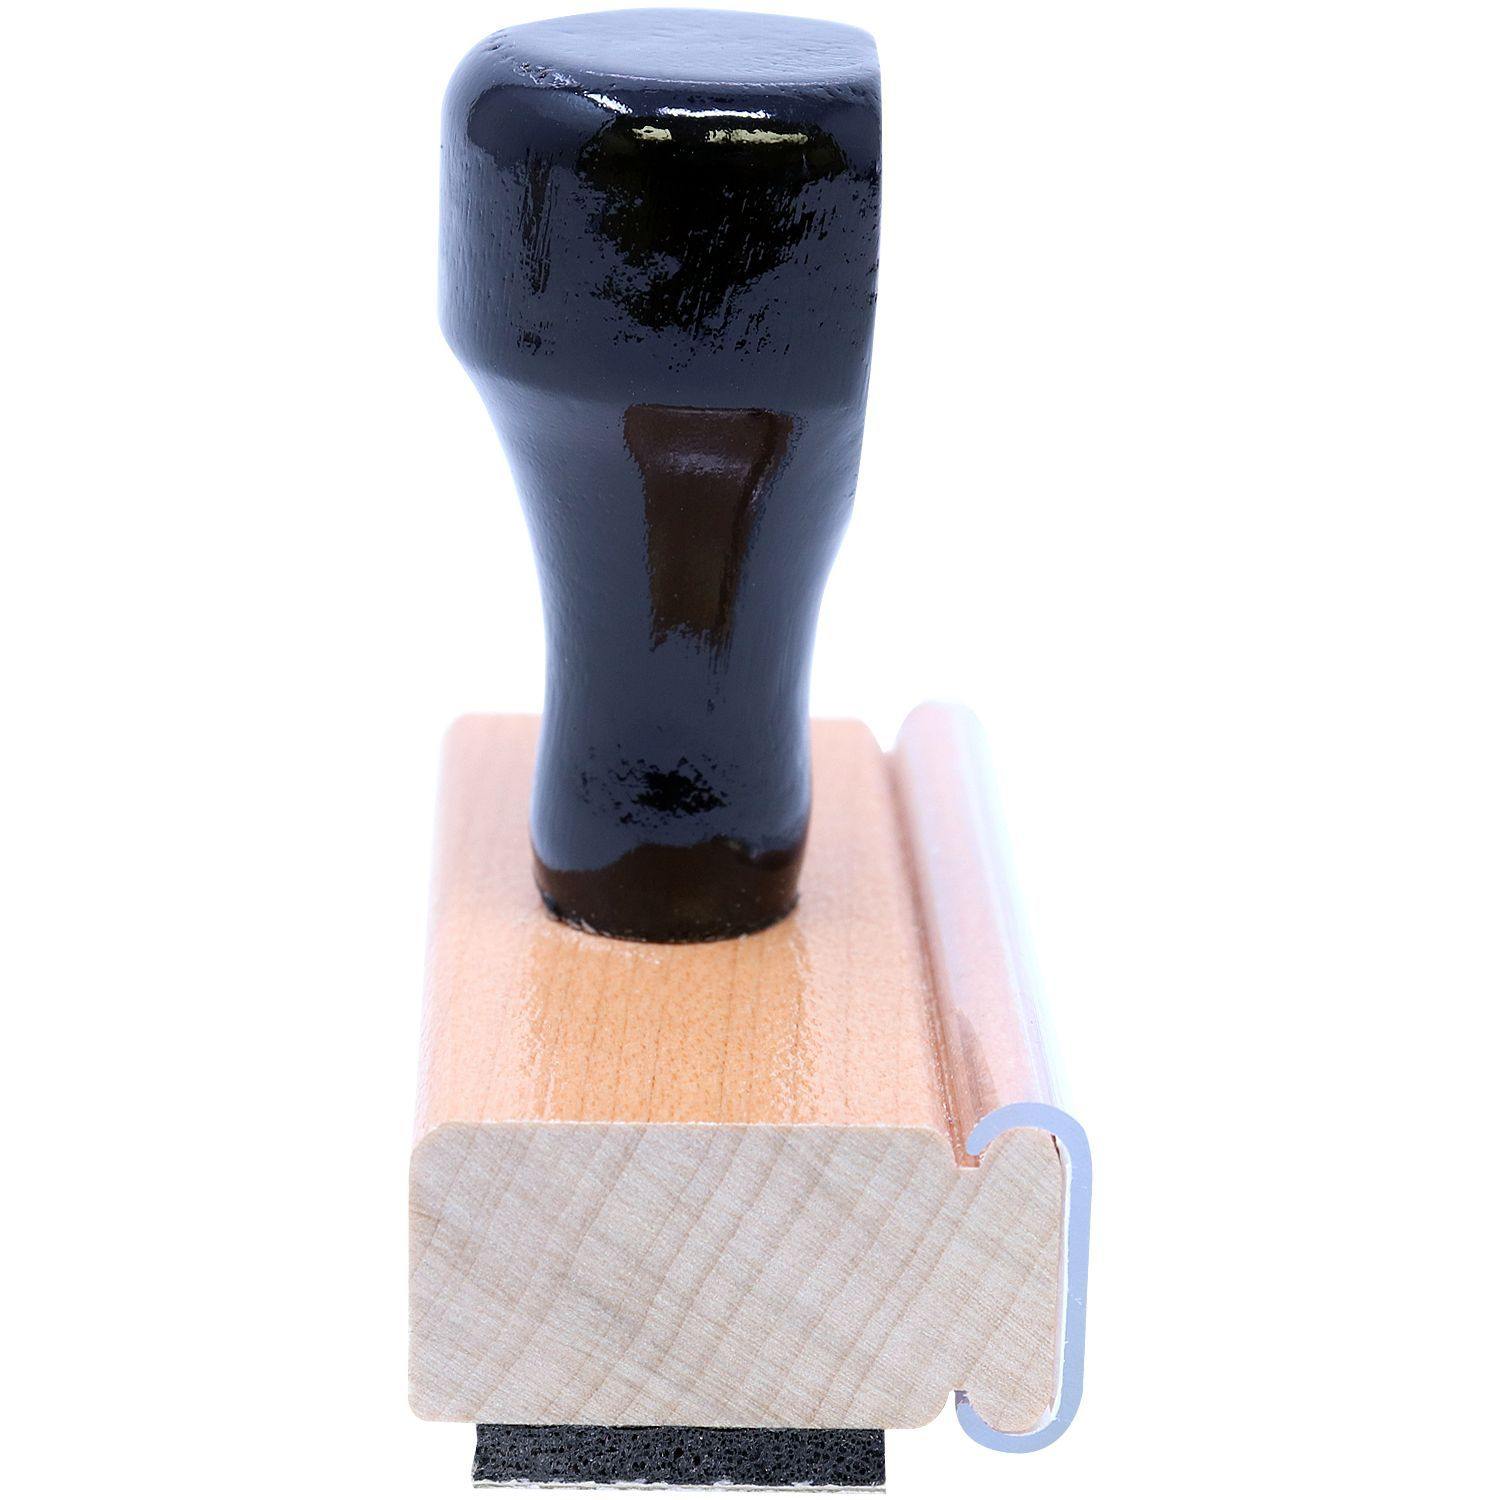 Outline Copy Rubber Stamp - Engineer Seal Stamps - Brand_Acorn, Impression Size_Small, Stamp Type_Regular Stamp, Type of Use_General, Type of Use_Office